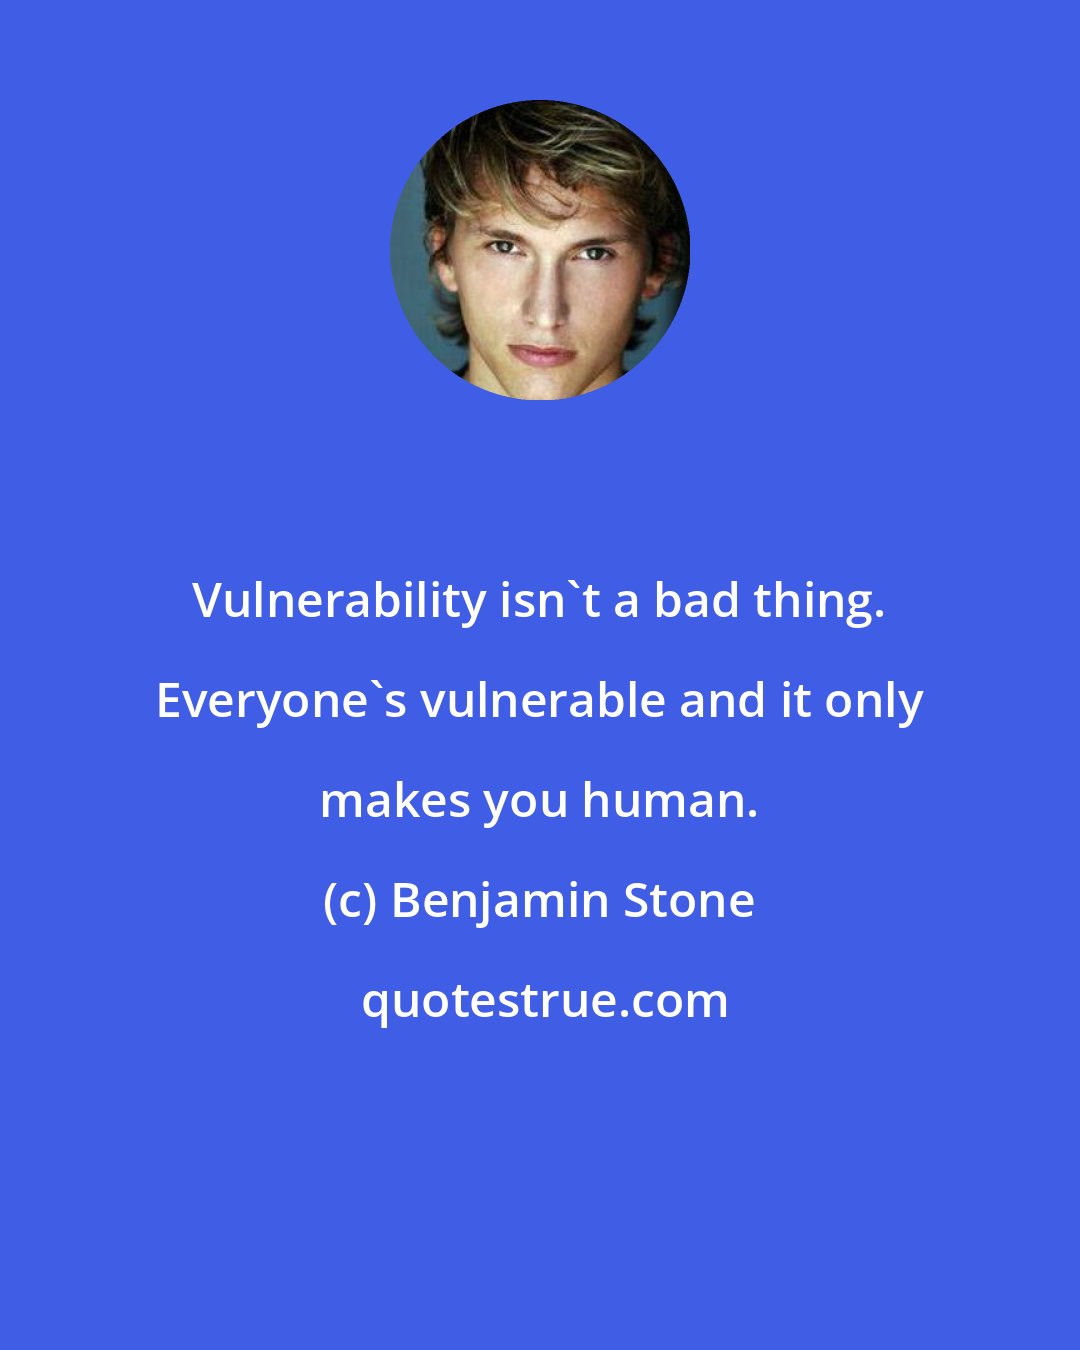 Benjamin Stone: Vulnerability isn't a bad thing. Everyone's vulnerable and it only makes you human.